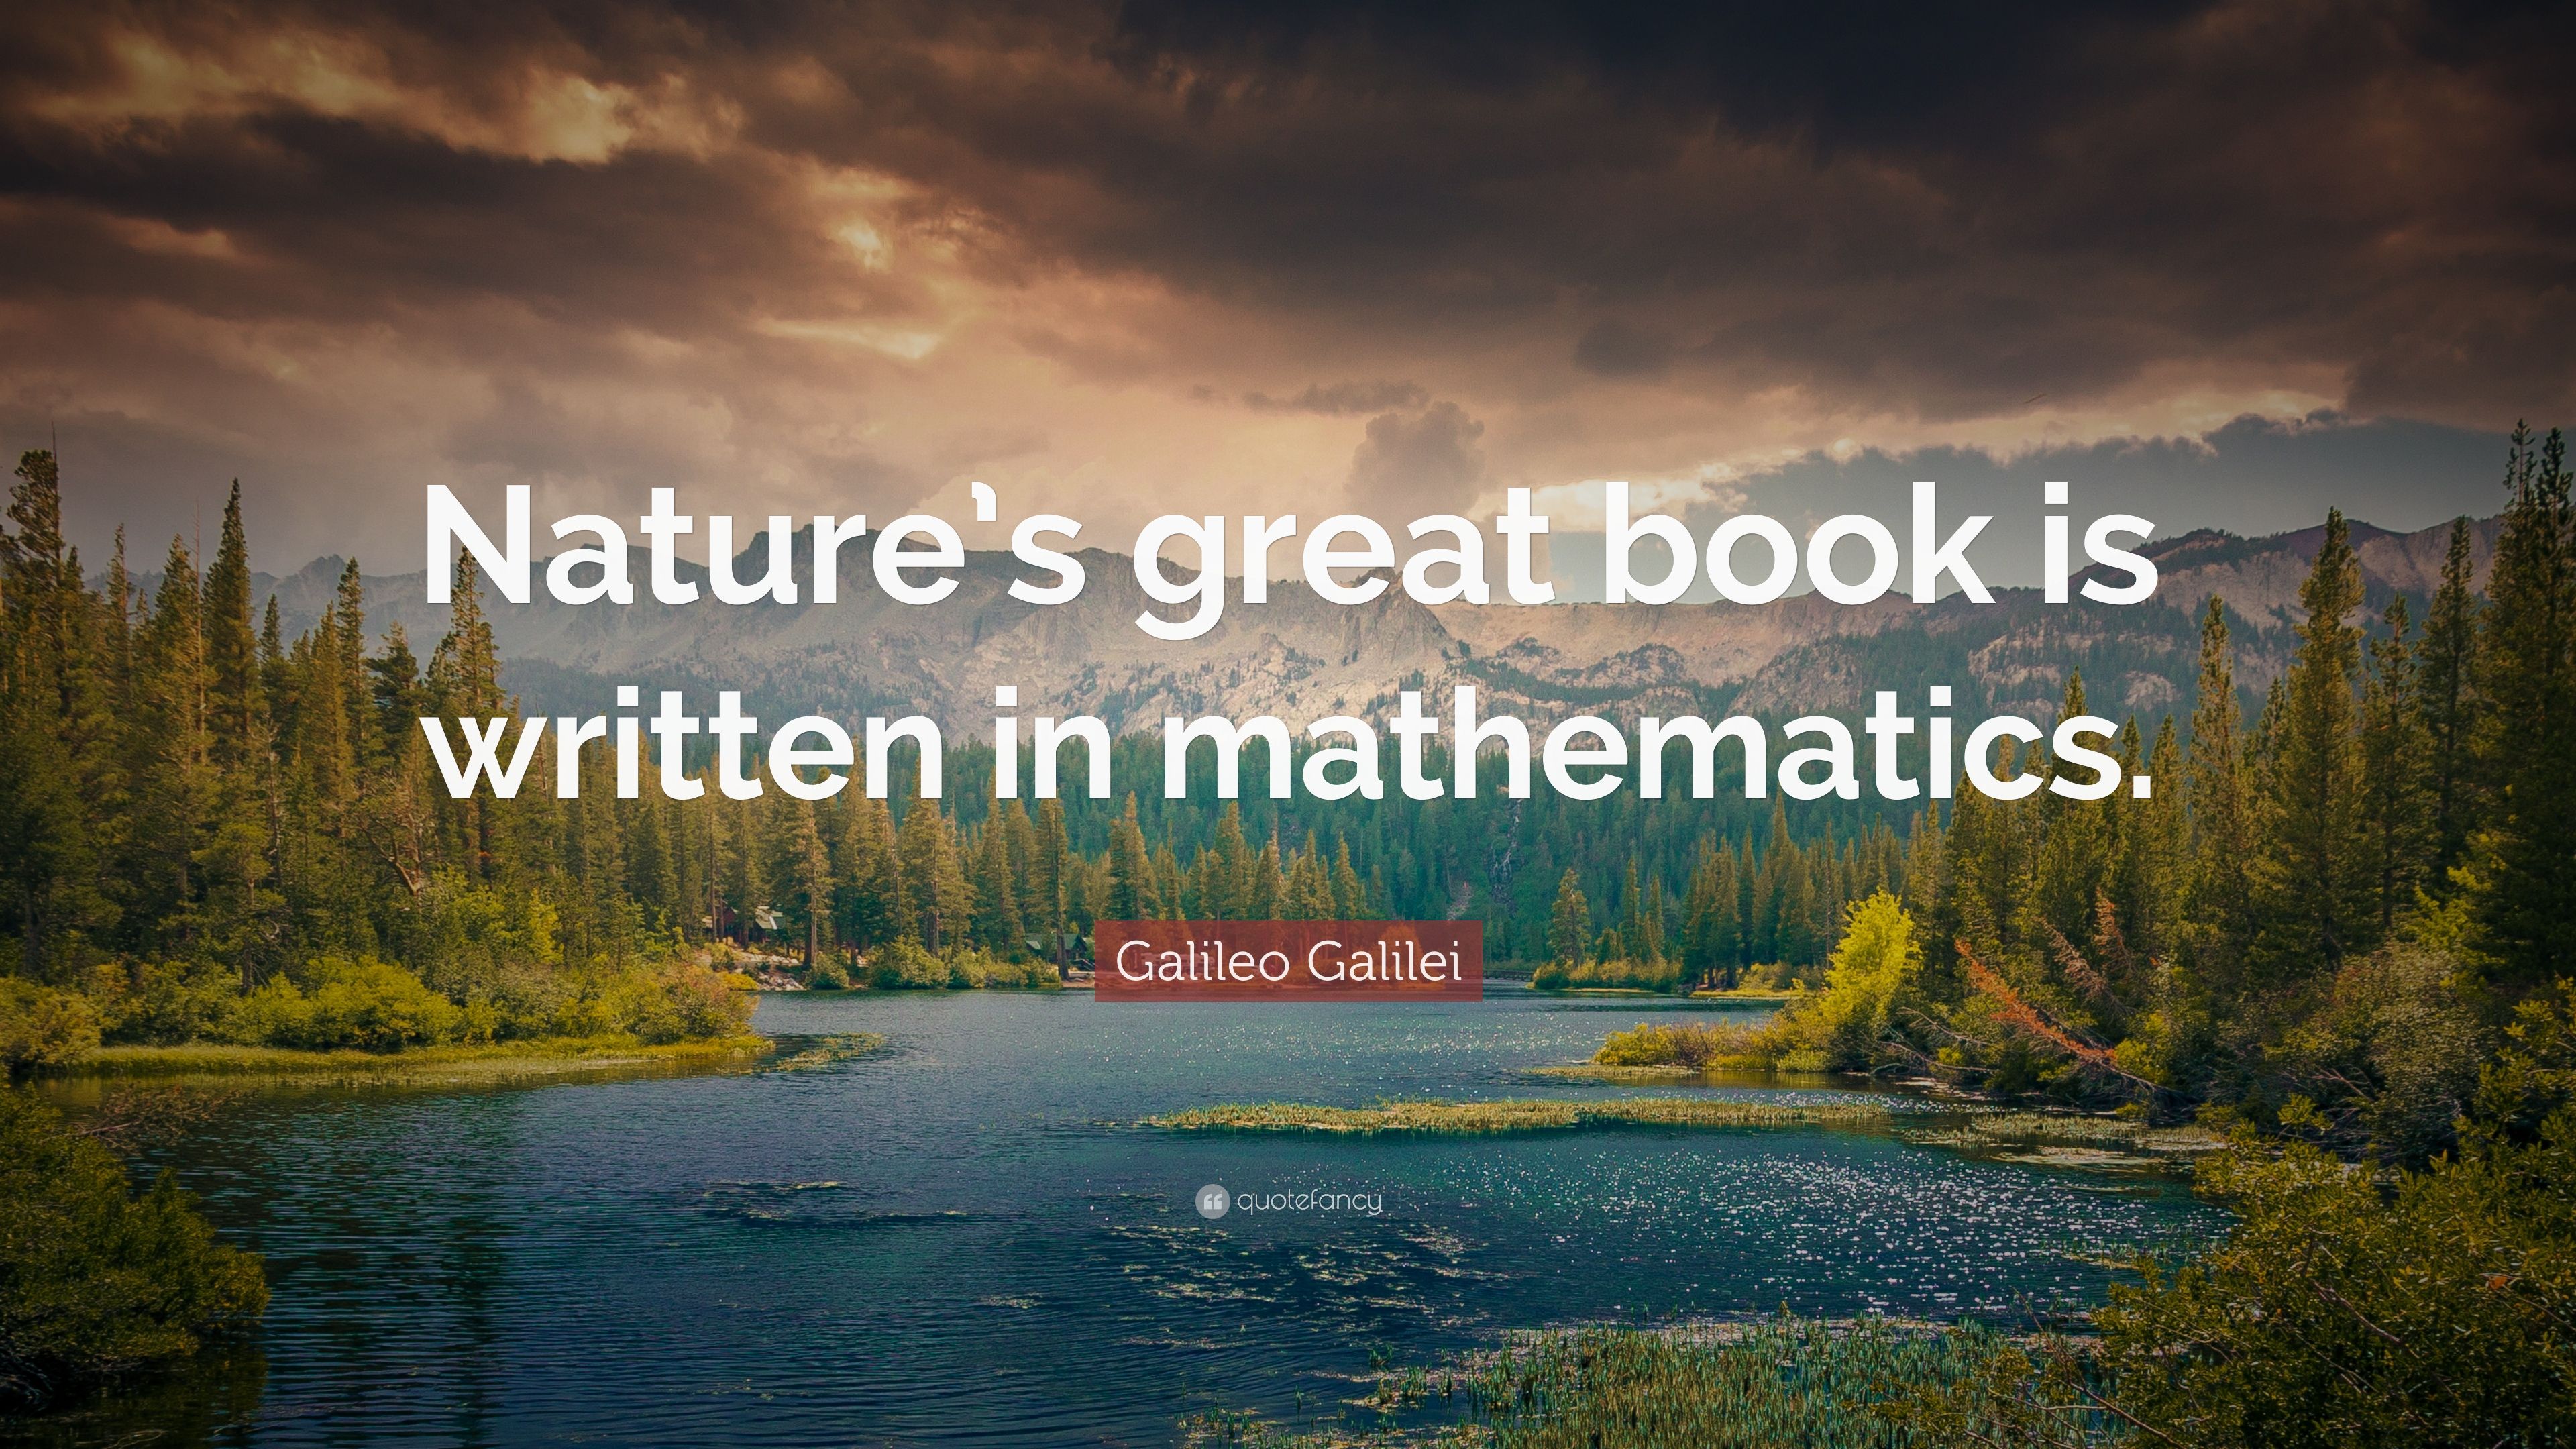 Galileo Galilei Quote: “Nature's great book is written